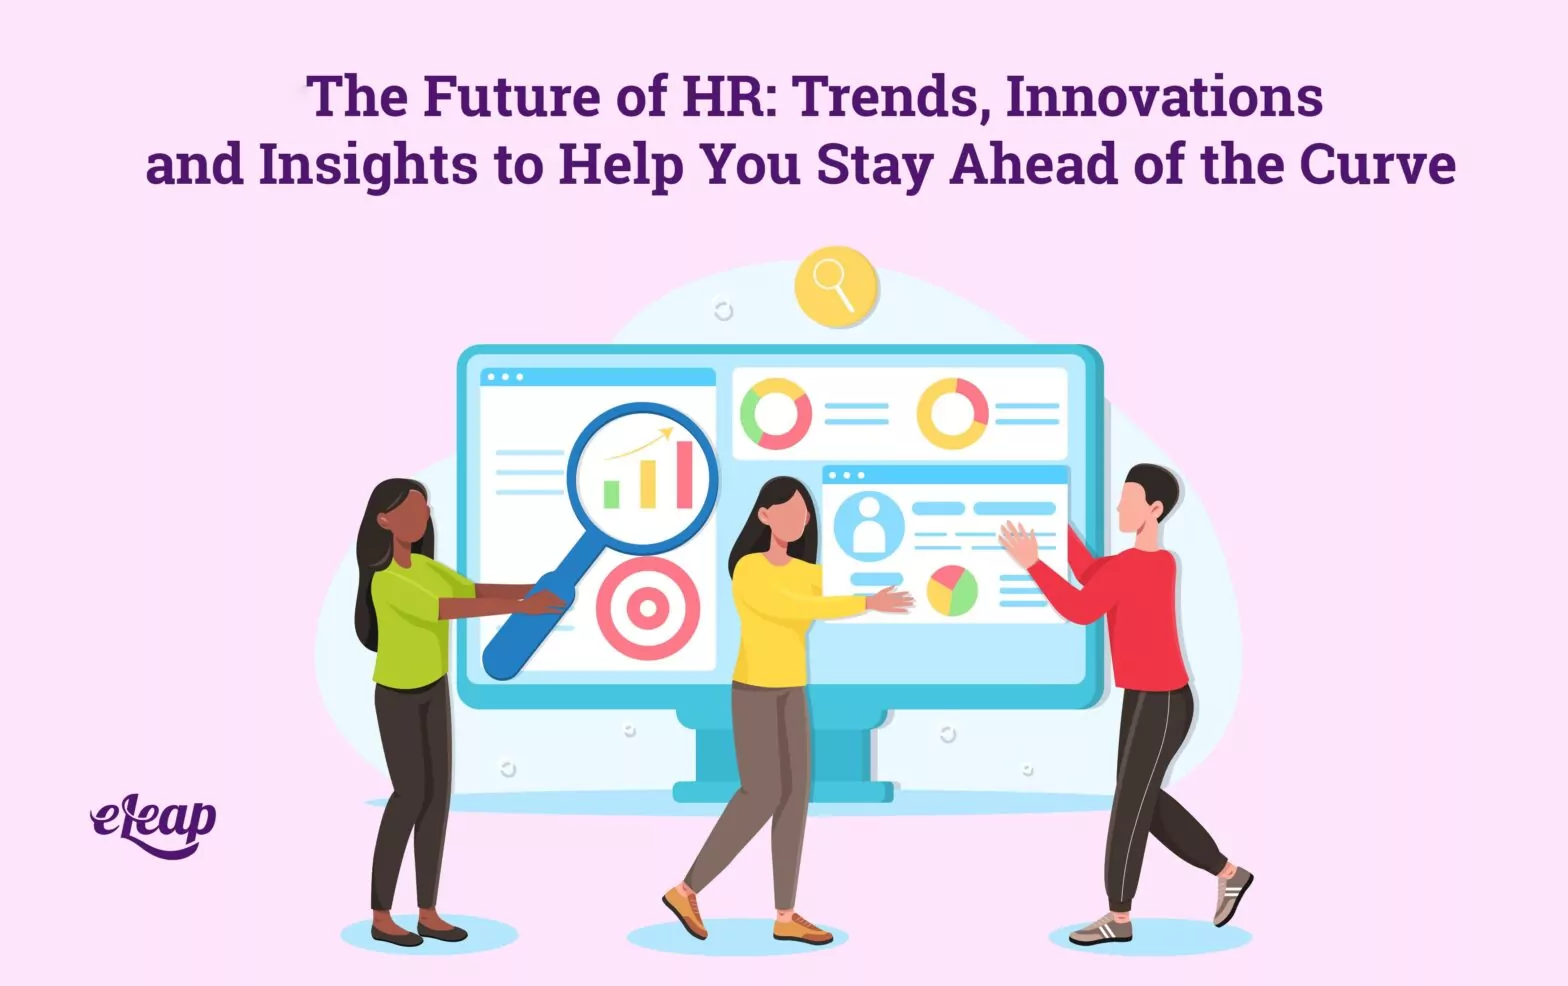 The Future of HR Trends, Innovations, and Insights to Help You Stay Ahead of the Curve